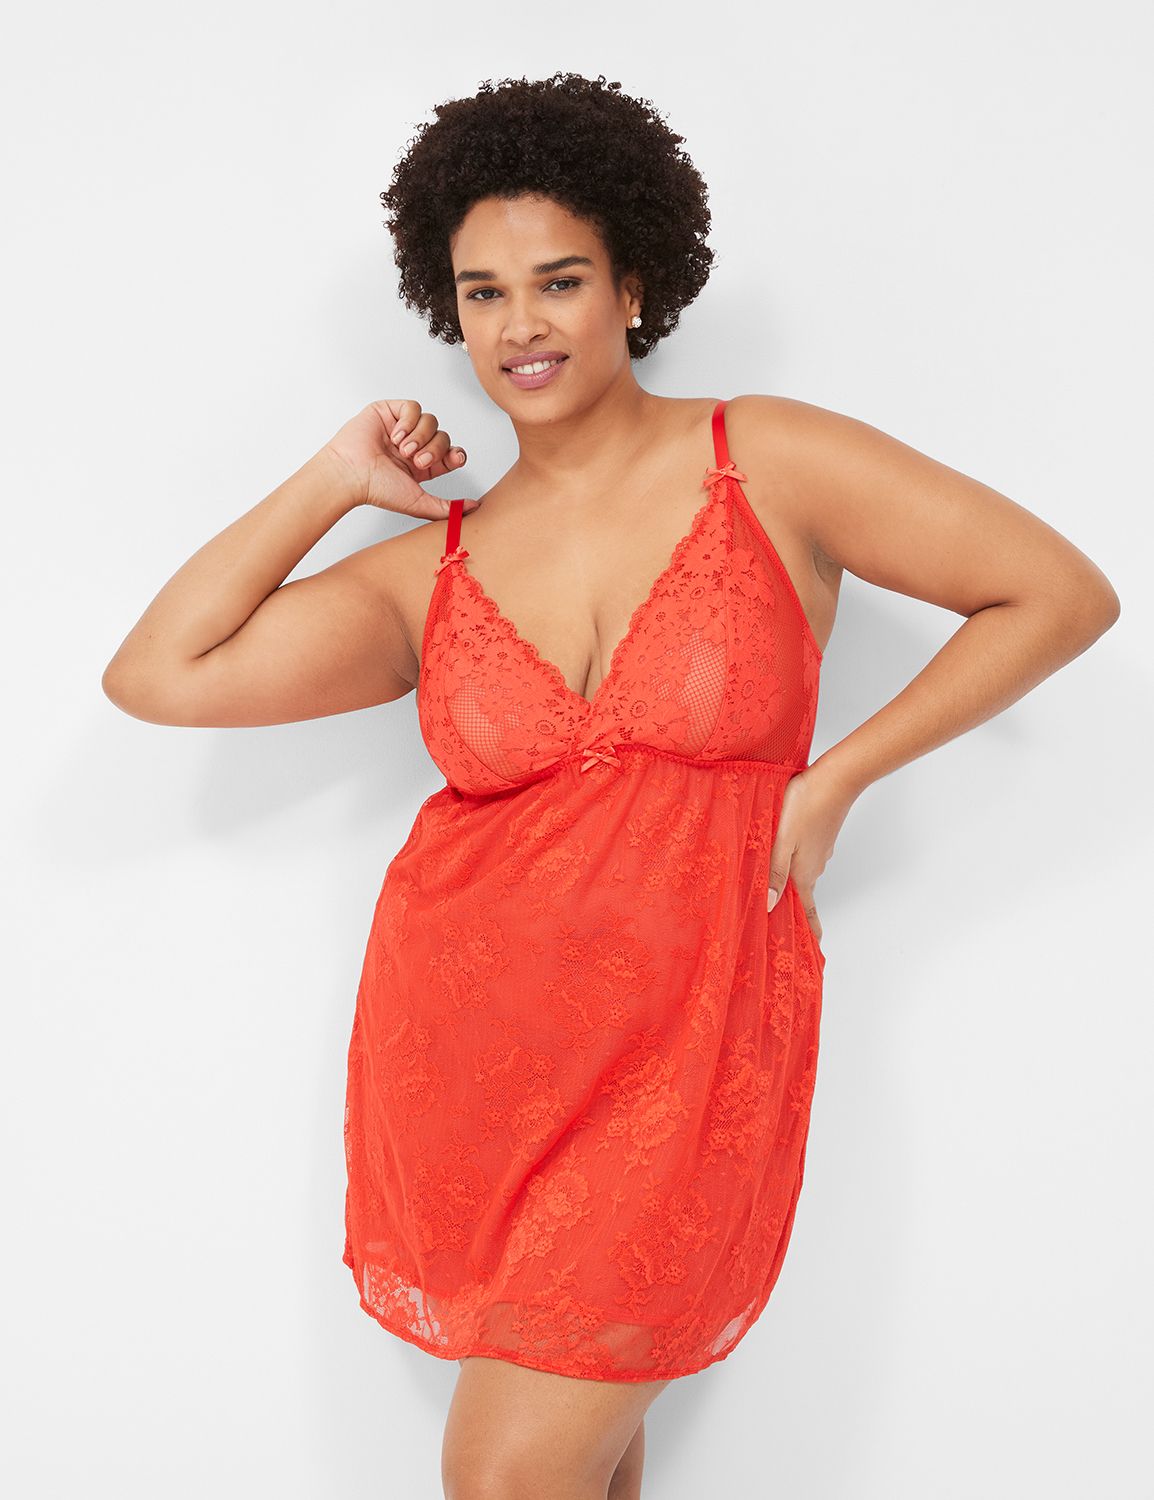 Cacique Spandex Nightgowns & Sleep Shirts for Women